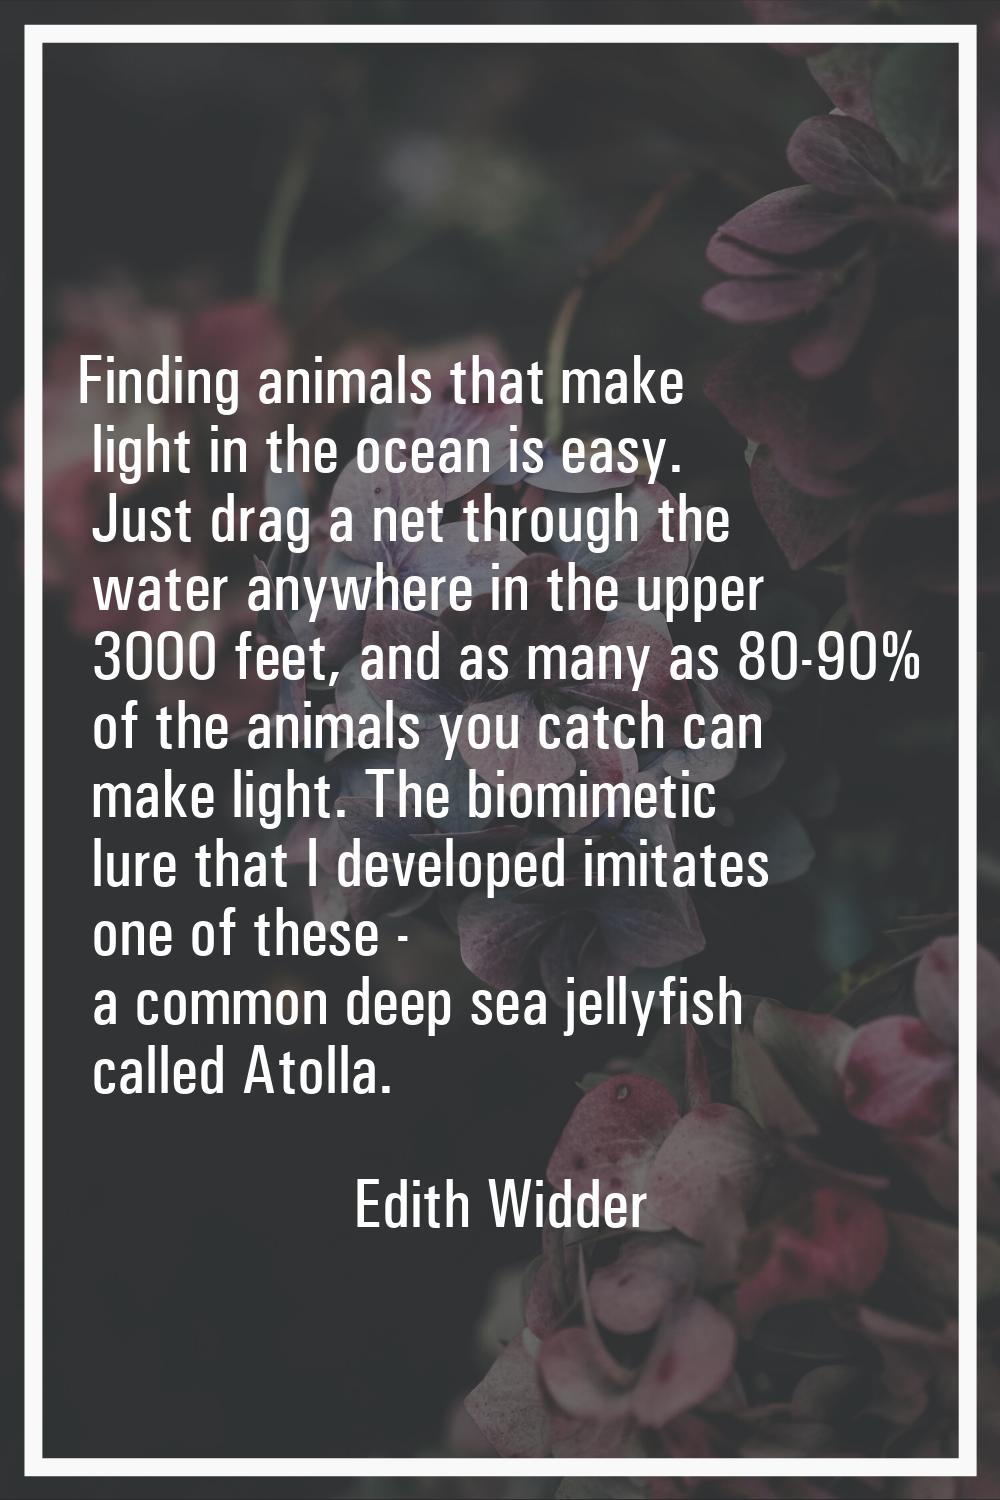 Finding animals that make light in the ocean is easy. Just drag a net through the water anywhere in